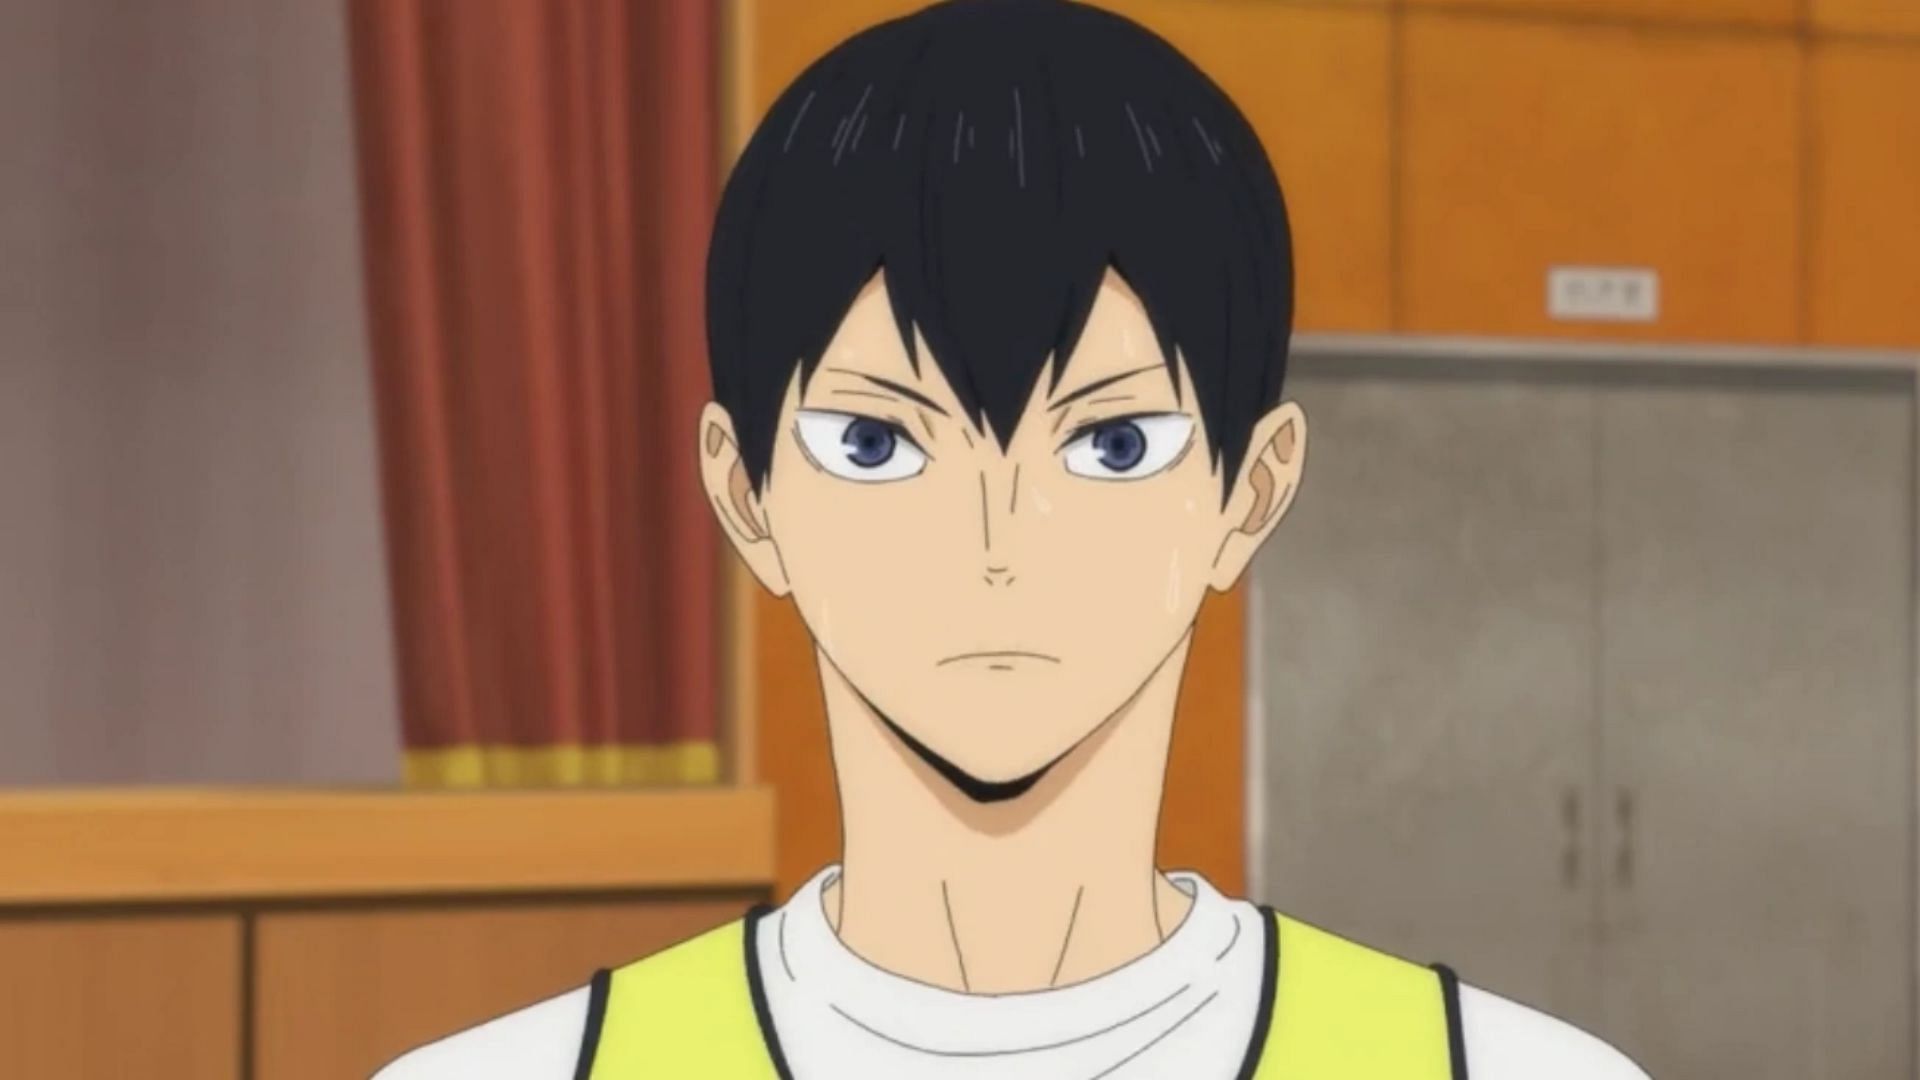 Tobio Kageyama is one of the best players on the Kageyama High boys&#039; volleyball team (Image via Production I.G)